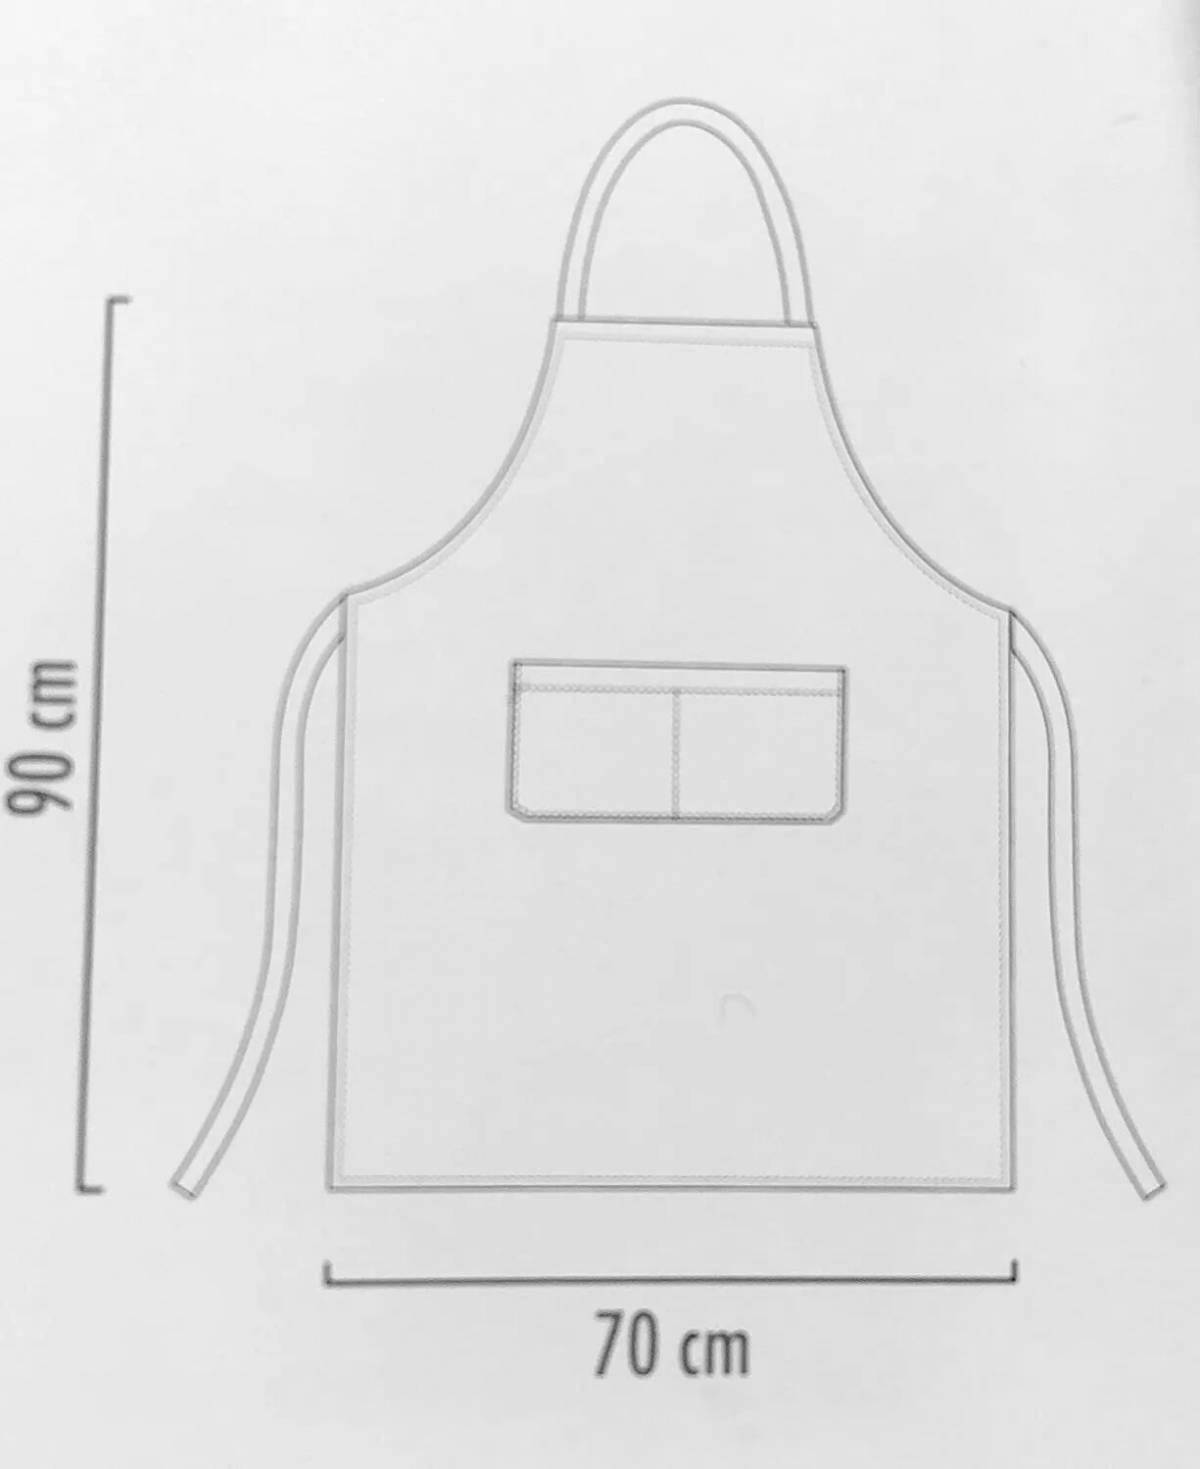 Eminent Chef's Apron coloring page for kids